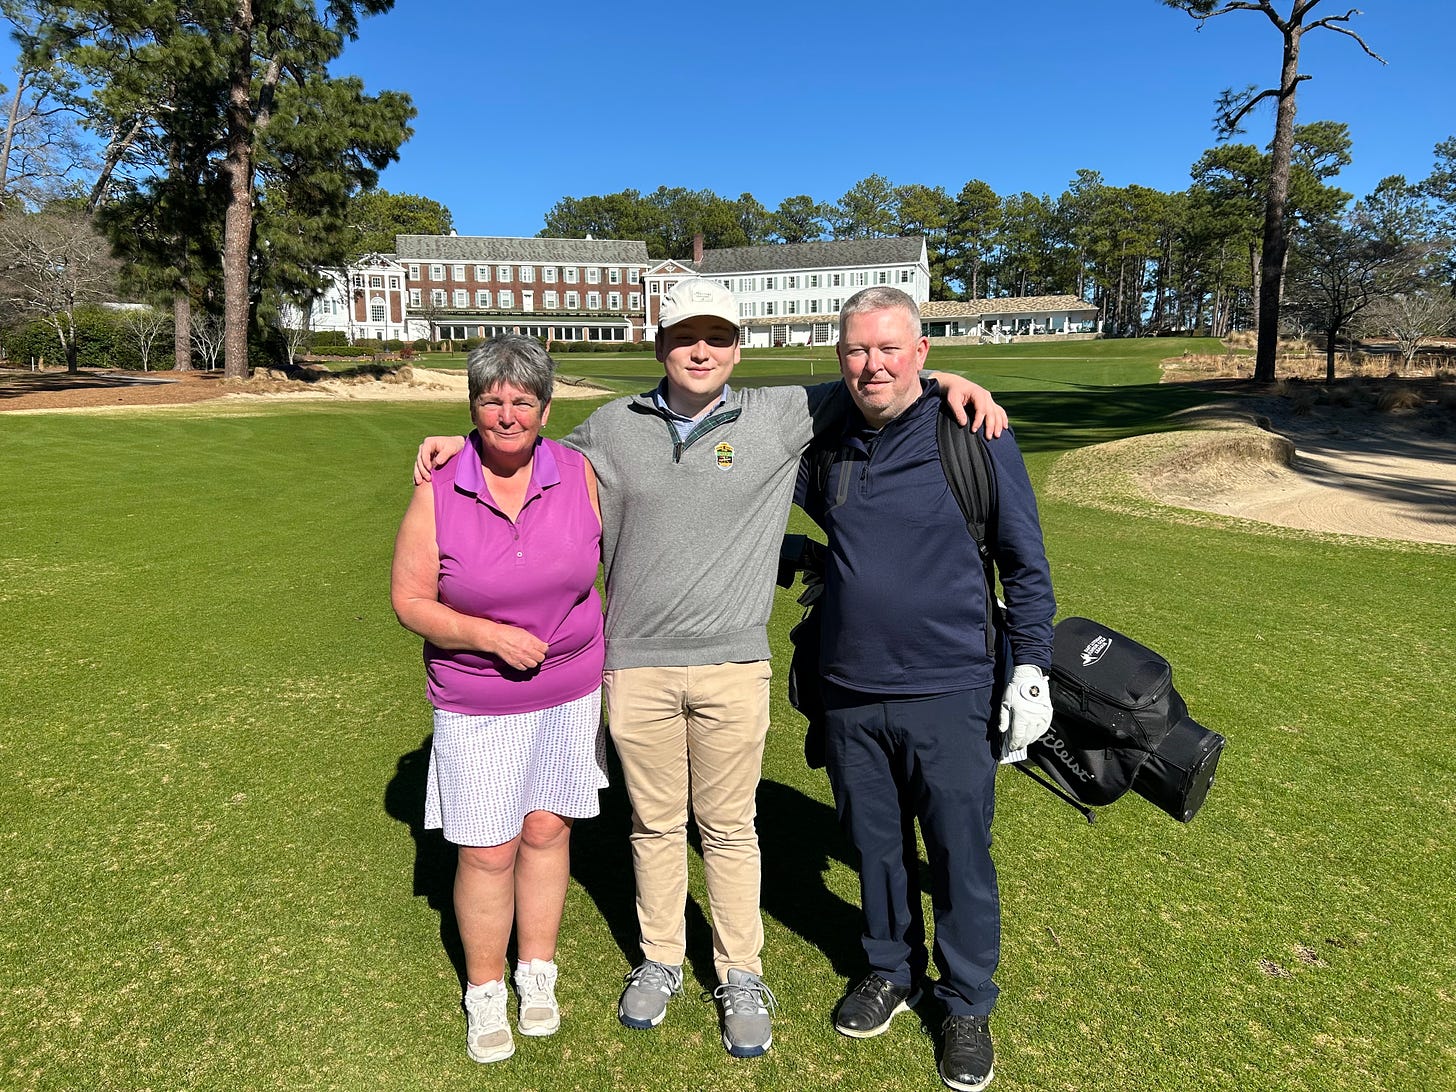 Shona, Jake, and Steve stand just short of the 18th green at the Mid Pines Golf Club. In the background, the Mid Pines Lodge imposes.